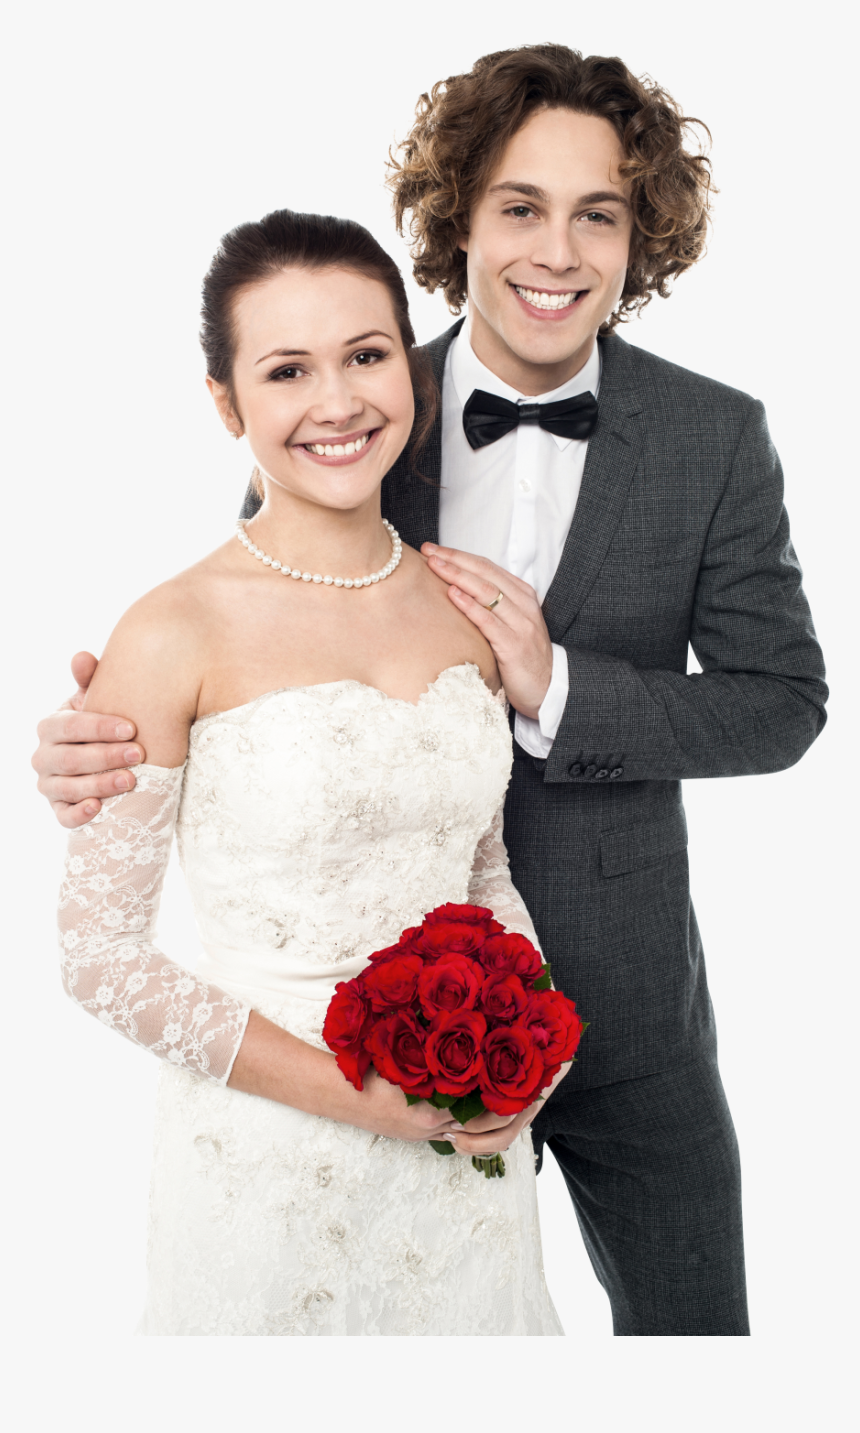 Wedding Couple Png - Couple Wedding Photos Png, Transparent Png, Free Download